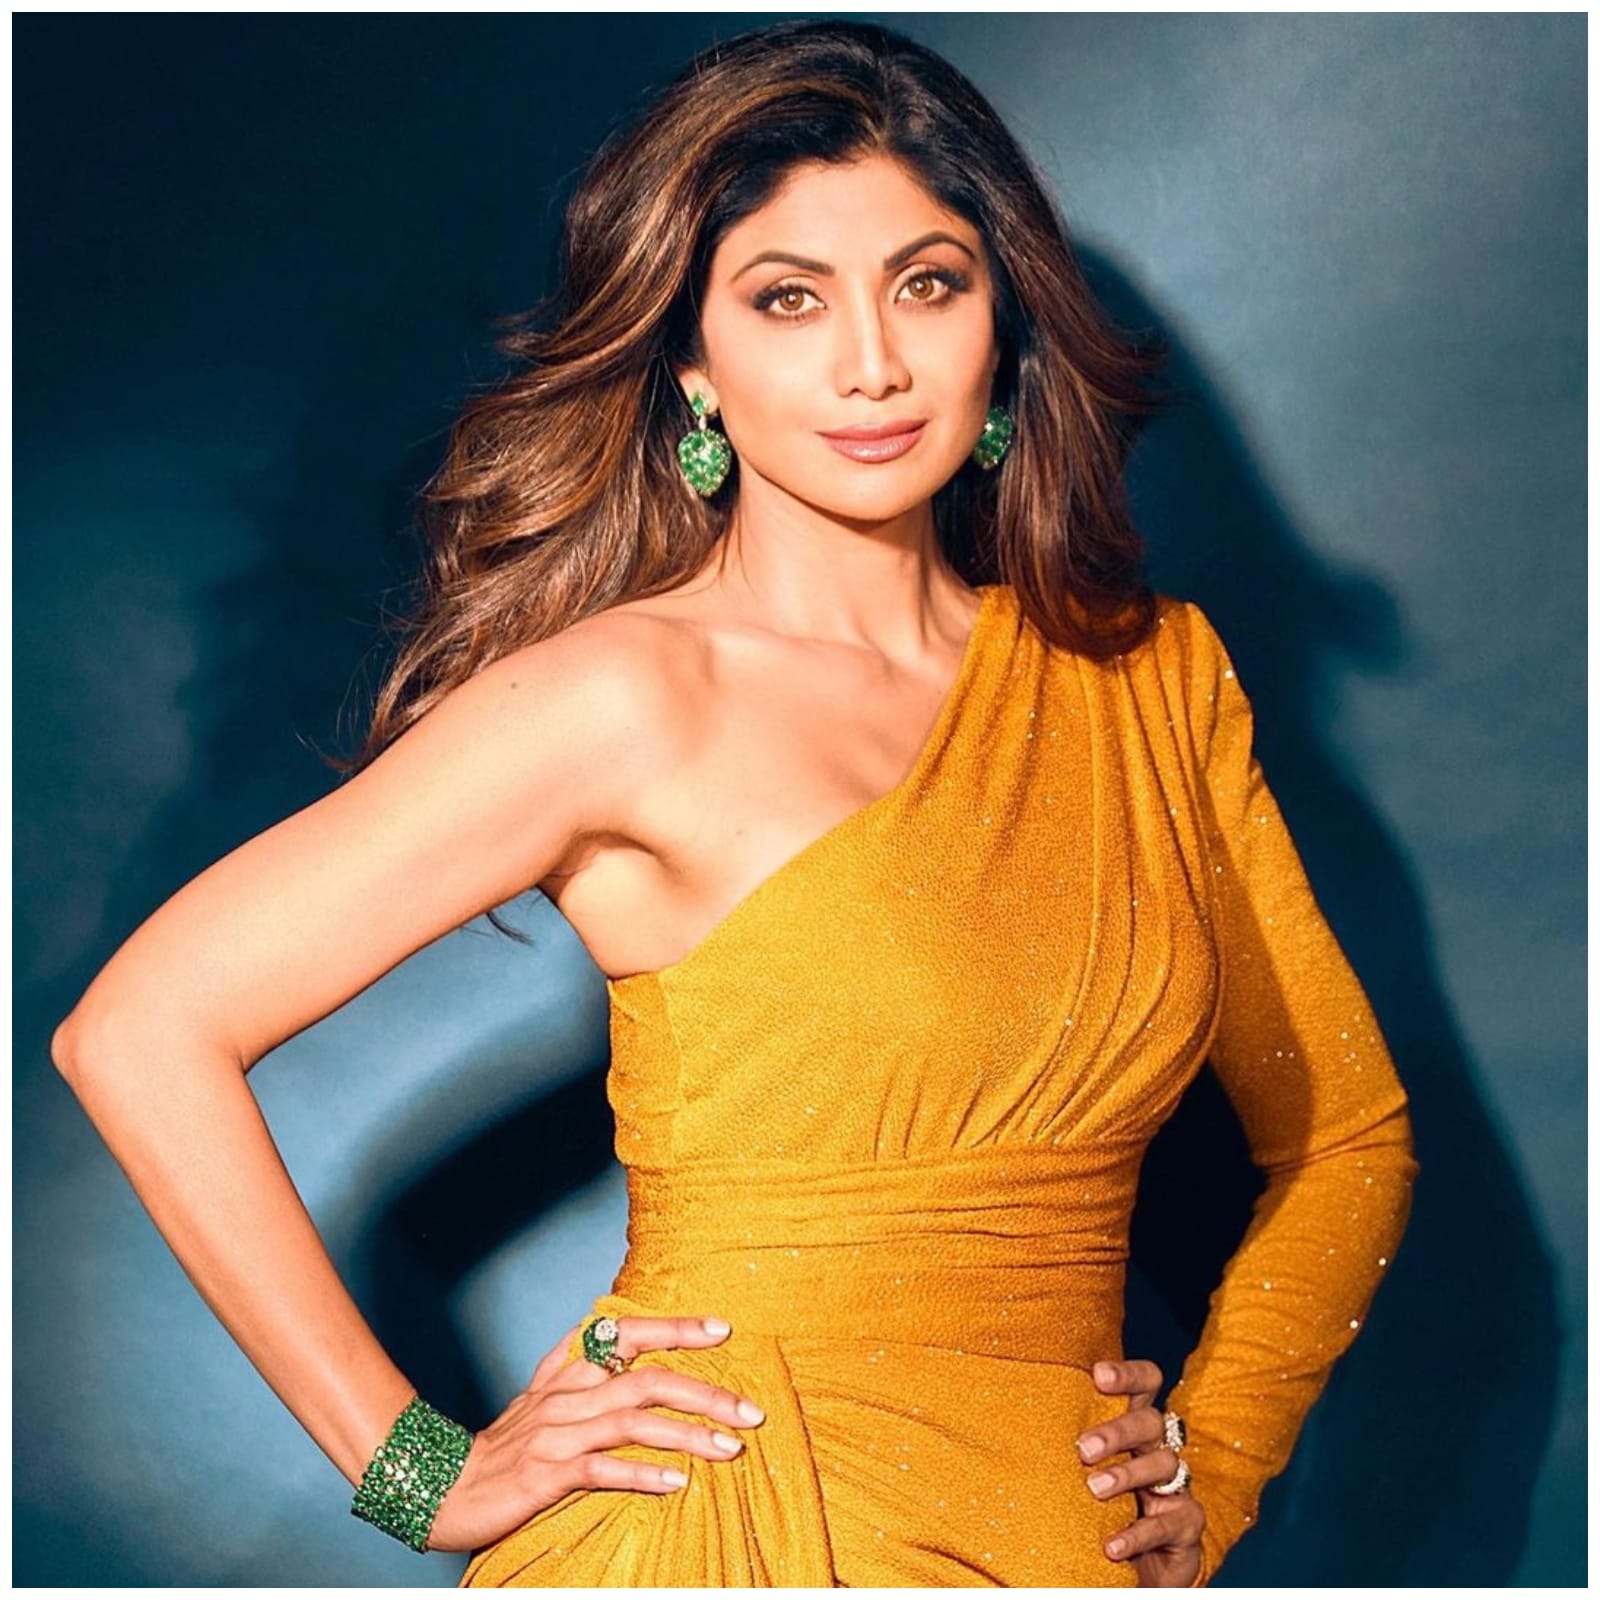 Bollywood Rallies Behind Shilpa Shetty as She Breaks Silence on Raj Kundra  Case, Requests for Privacy